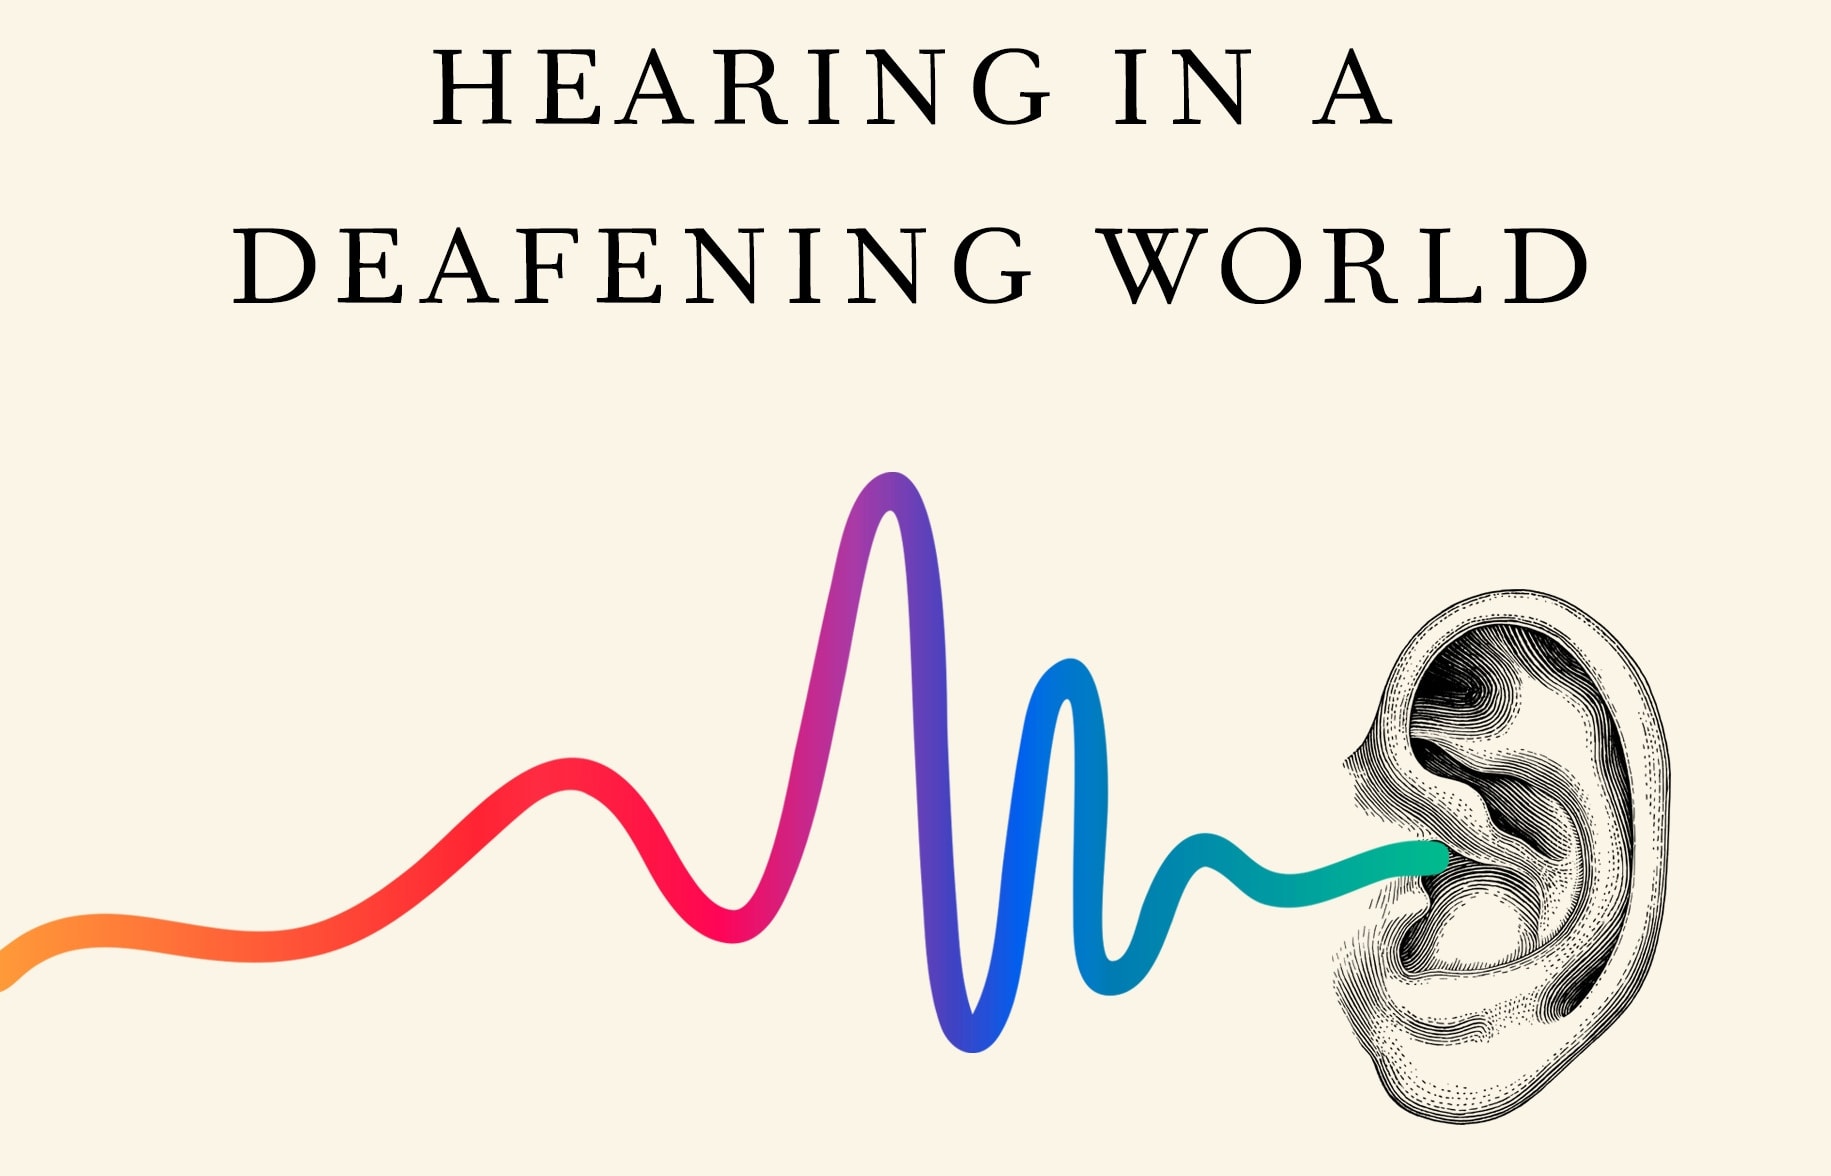 "Volume Control: Hearing in a Deafening World"